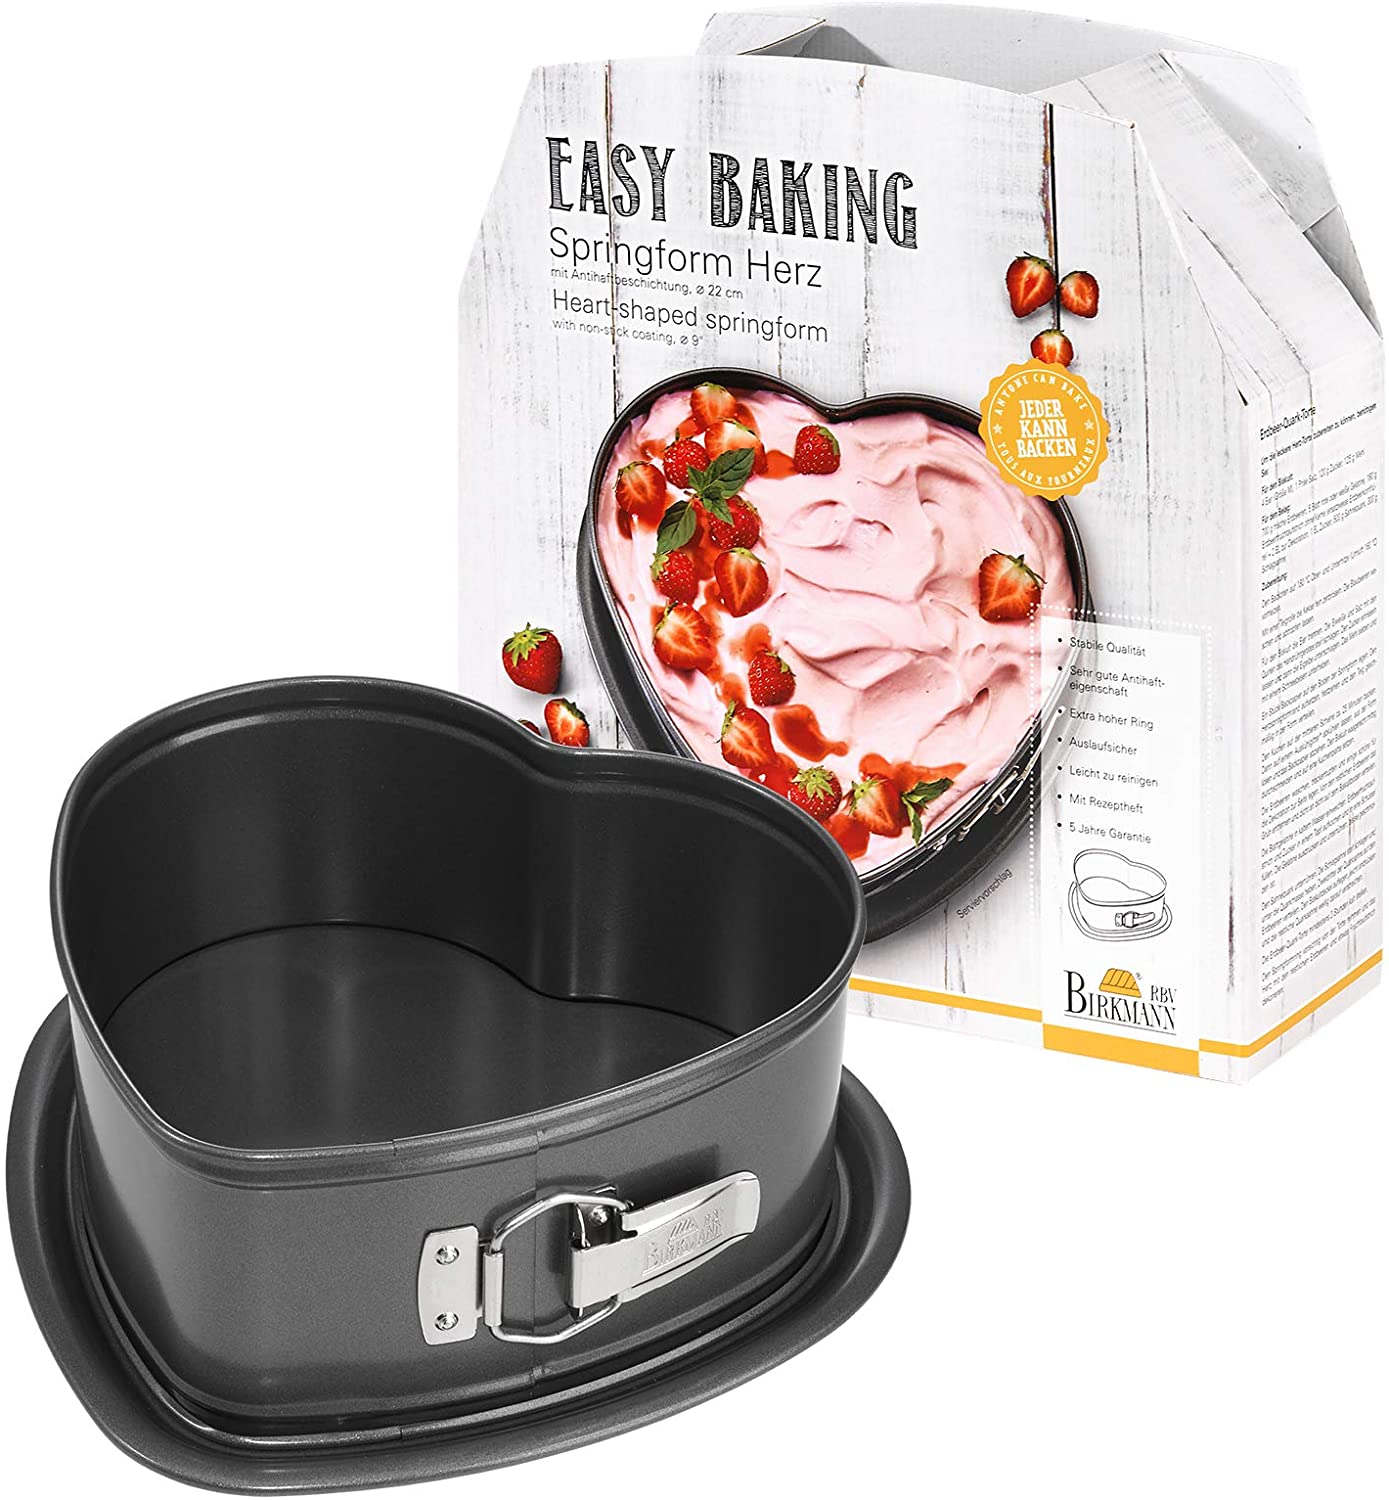 Baking Moulds from the Easy Baking Range by RBV Birkmann